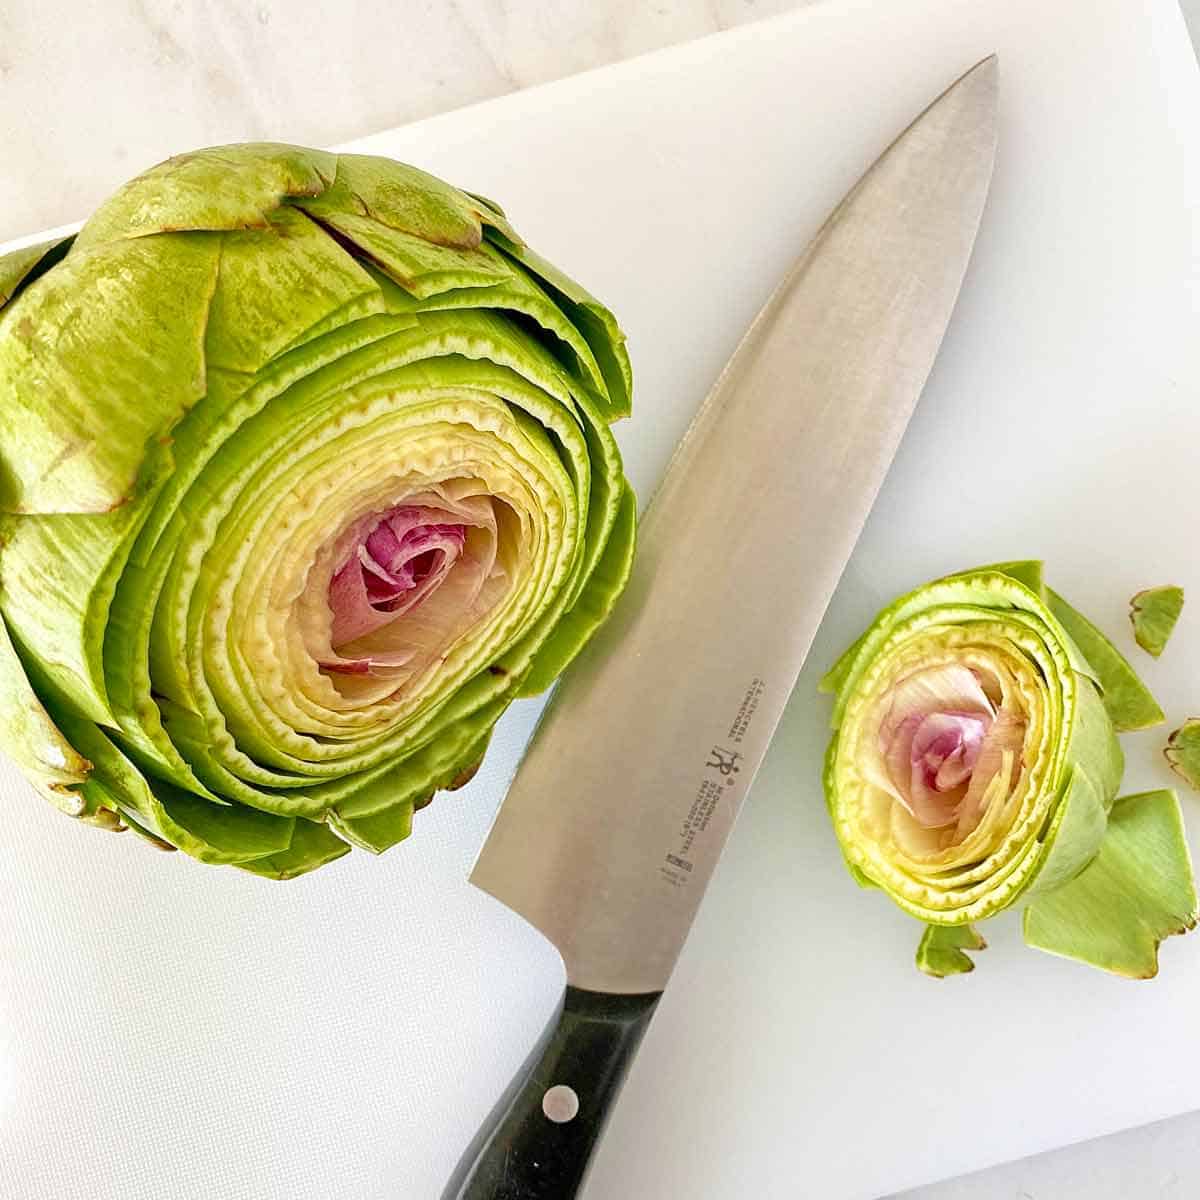 An artichoke with the top sliced off and a knife on a cutting board.